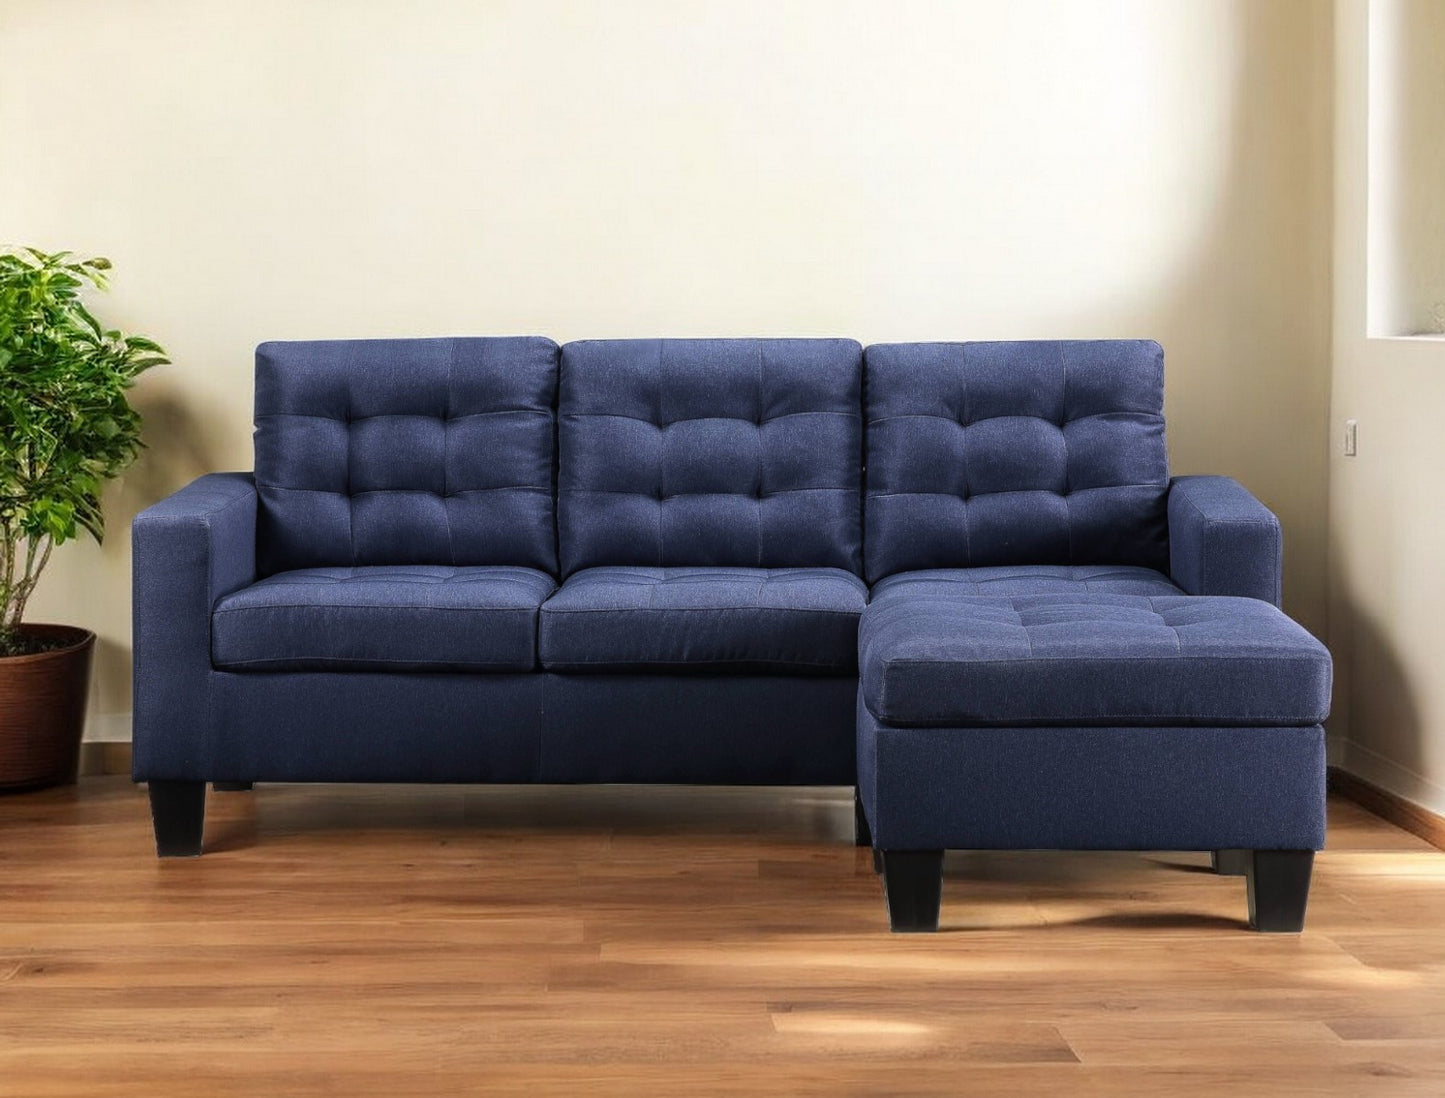 81" Blue Linen Sofa With Ottoman With Black Legs